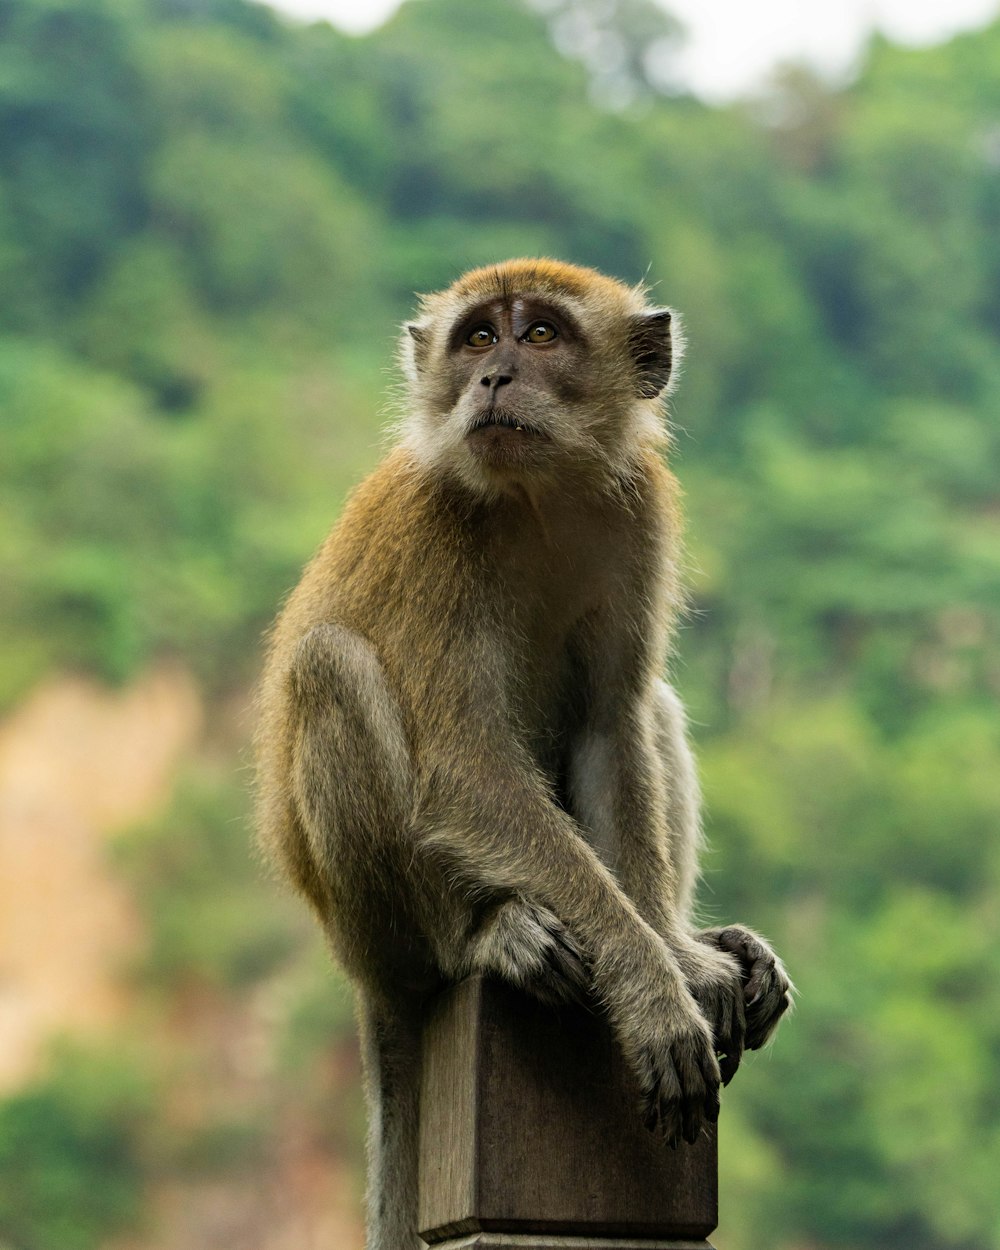 500+ Cute Monkey Photo Pictures [HD] | Download Free Images on Unsplash